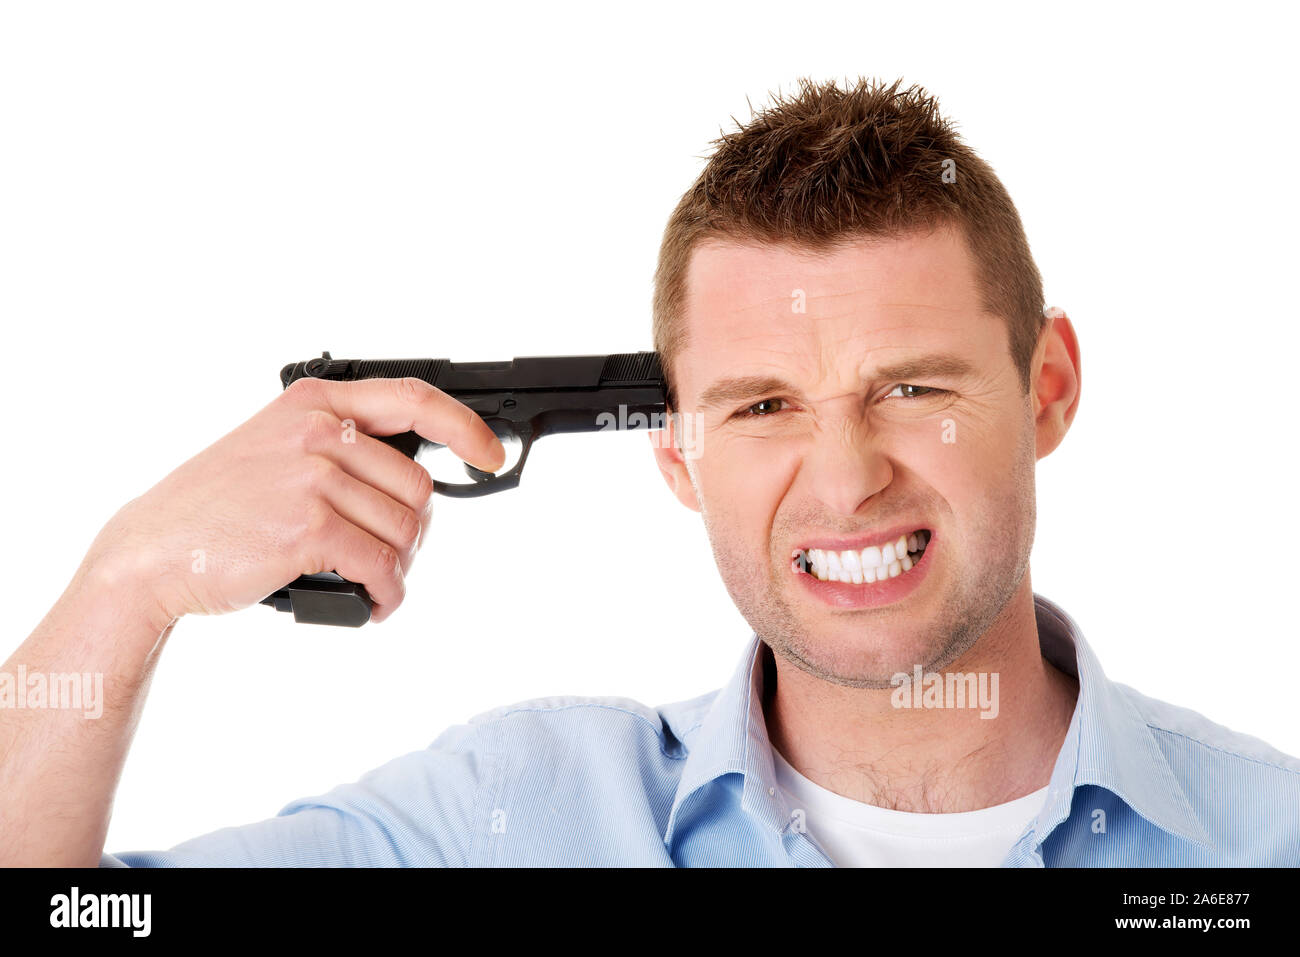 Man putting gun to head. He is depressed and frustrated and thinking of suicide. Stock Photo